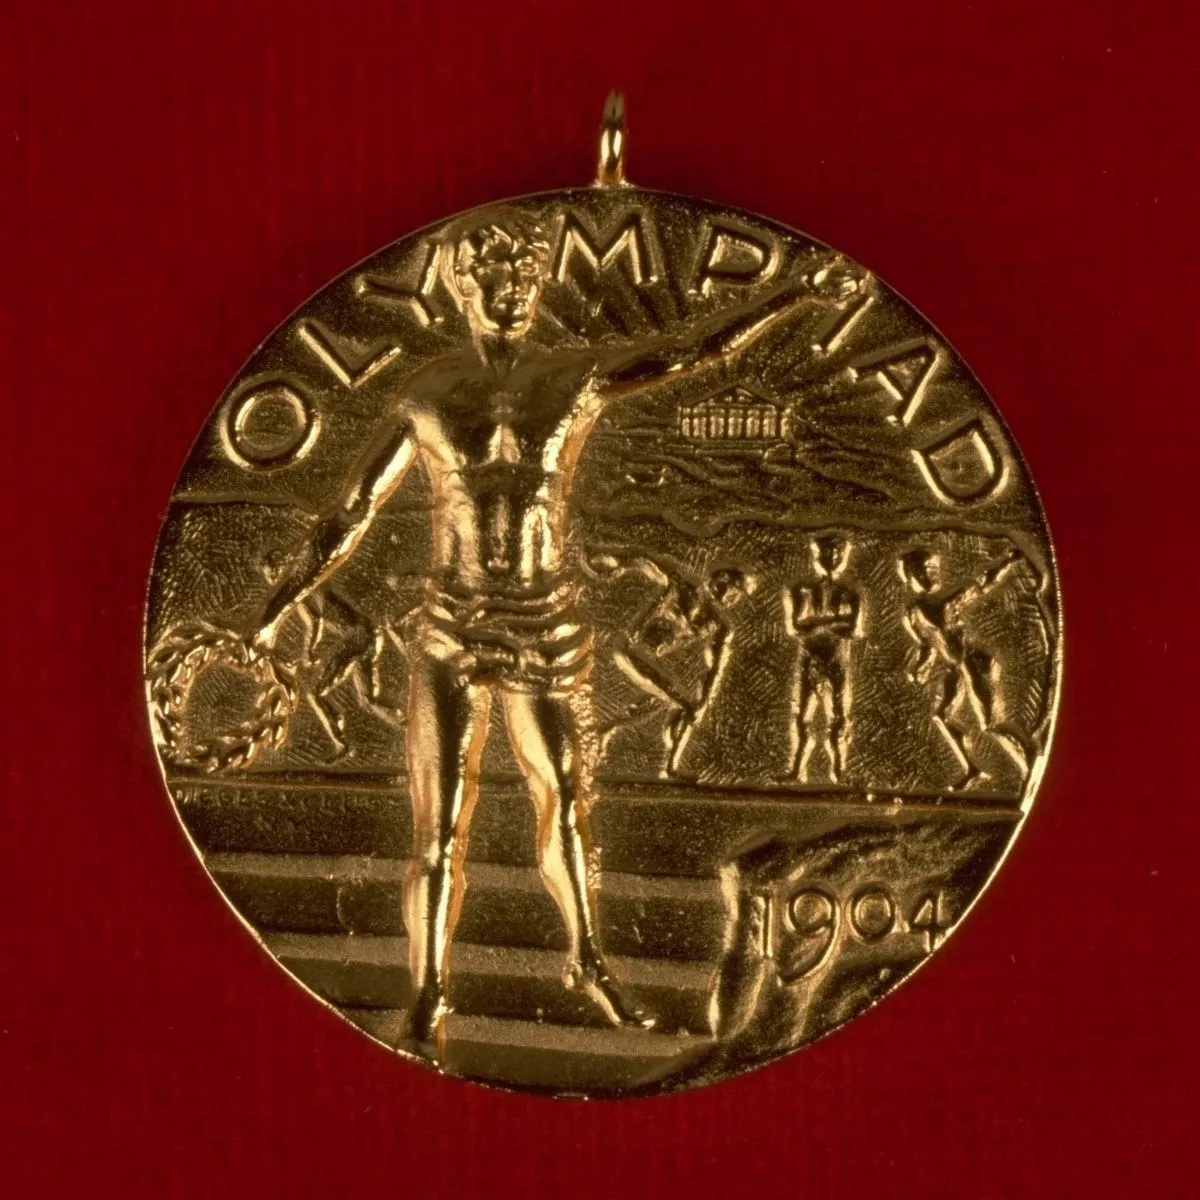 st louis 1904 the obverse shows a triumphant athlete in front of a bas relief illustrating the classic sports from antiquity